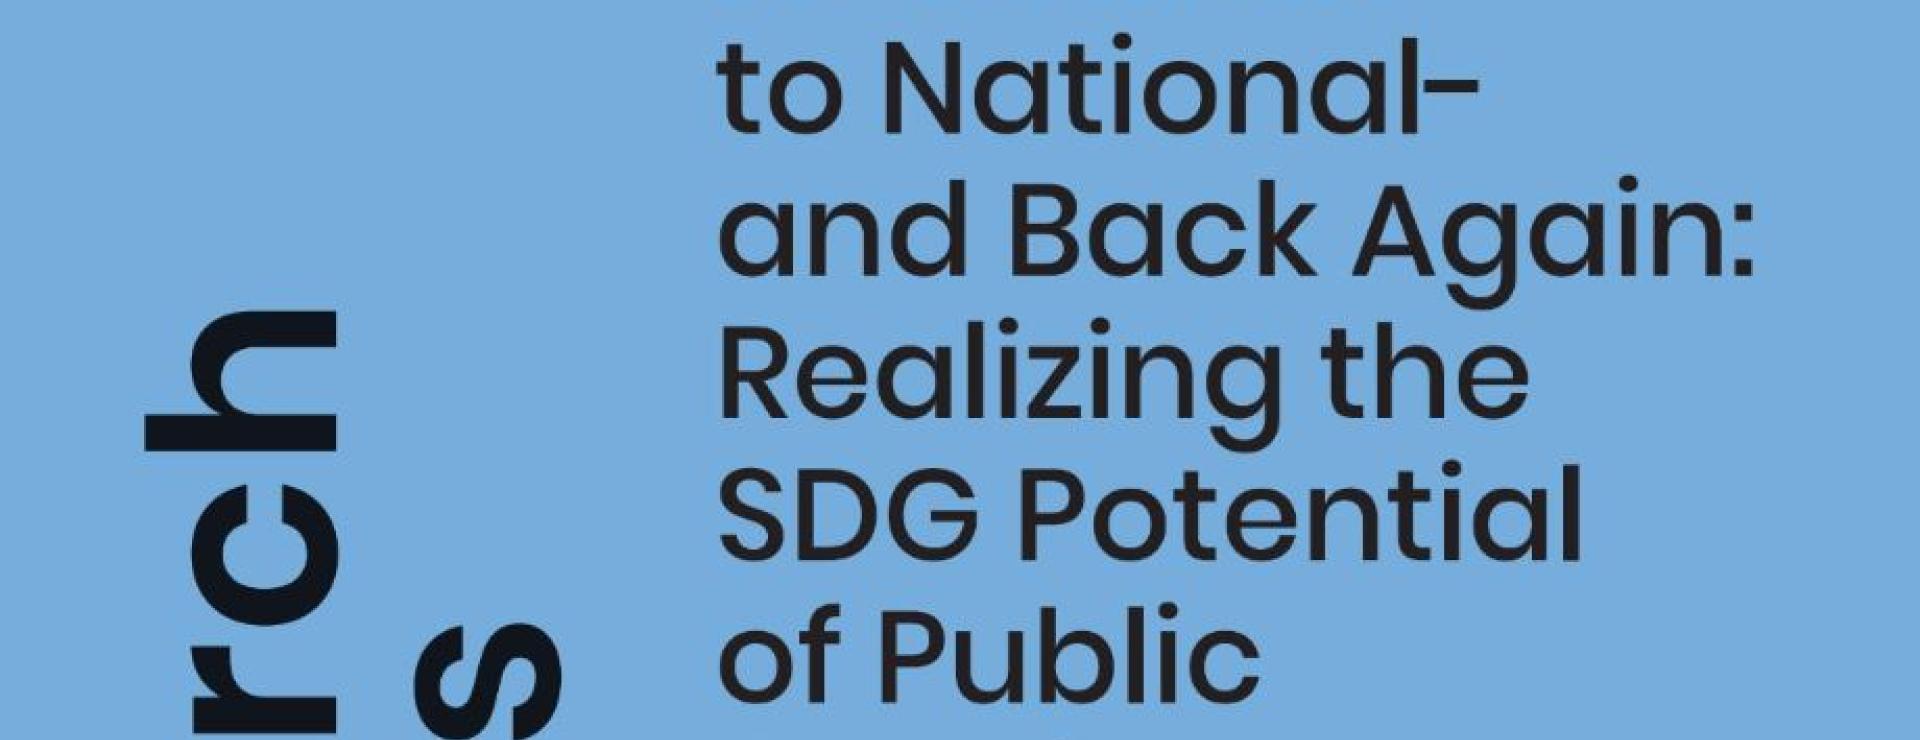 From Multi- to National- and Back Again: Realizing the SDG Potential of Public Development Banks | Research Paper No. 266